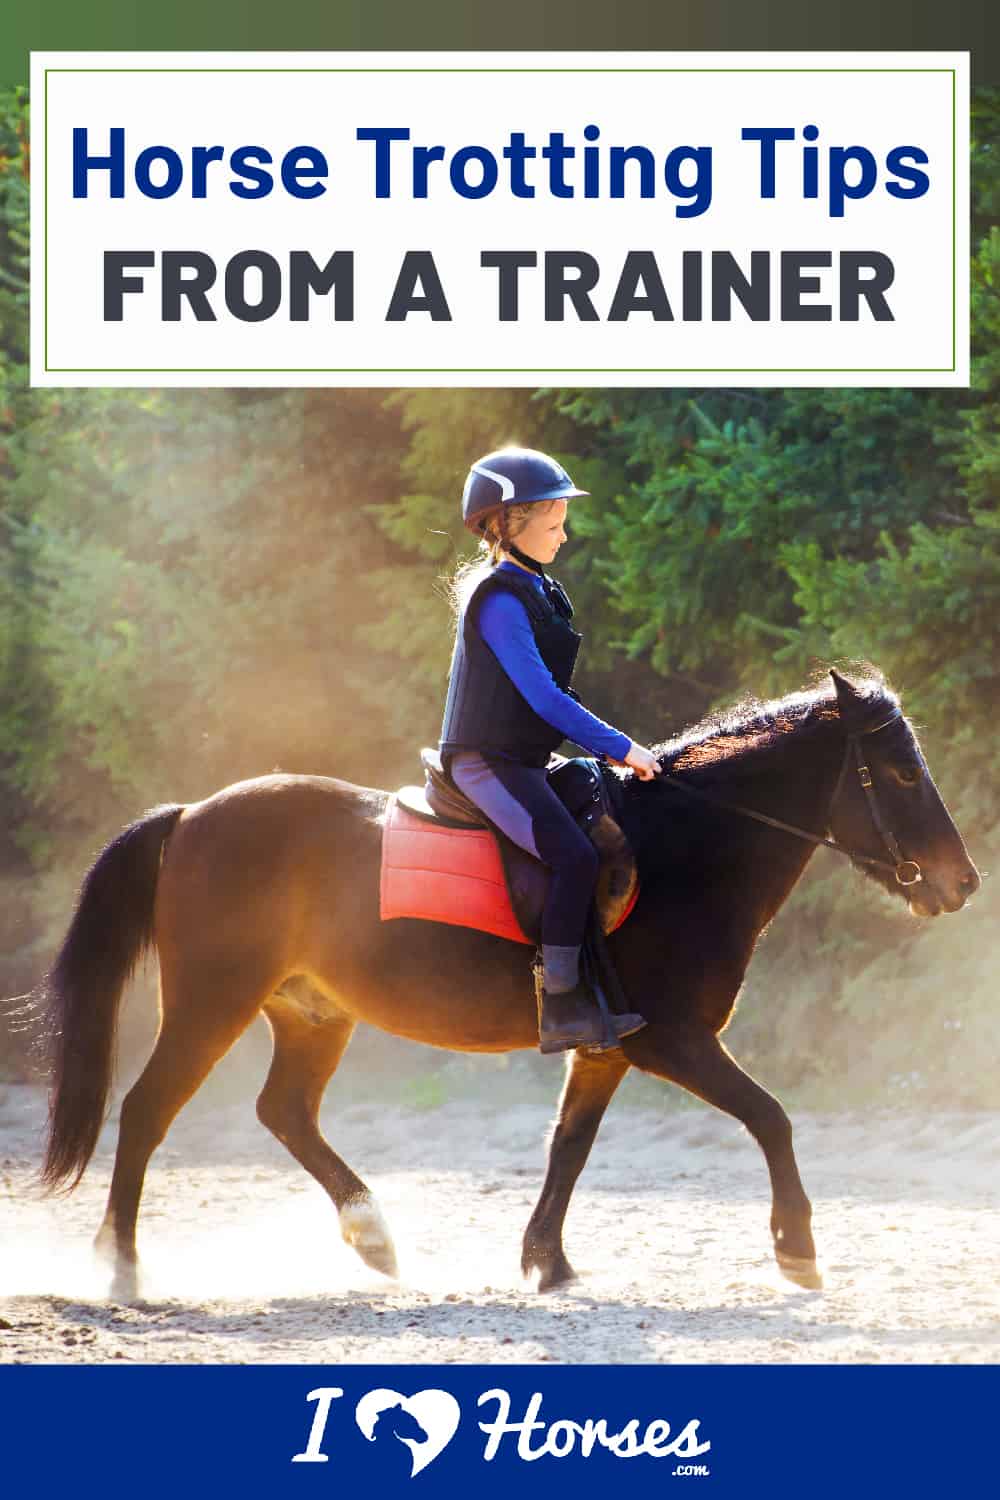 Horse Trotting Tips From A Trainer